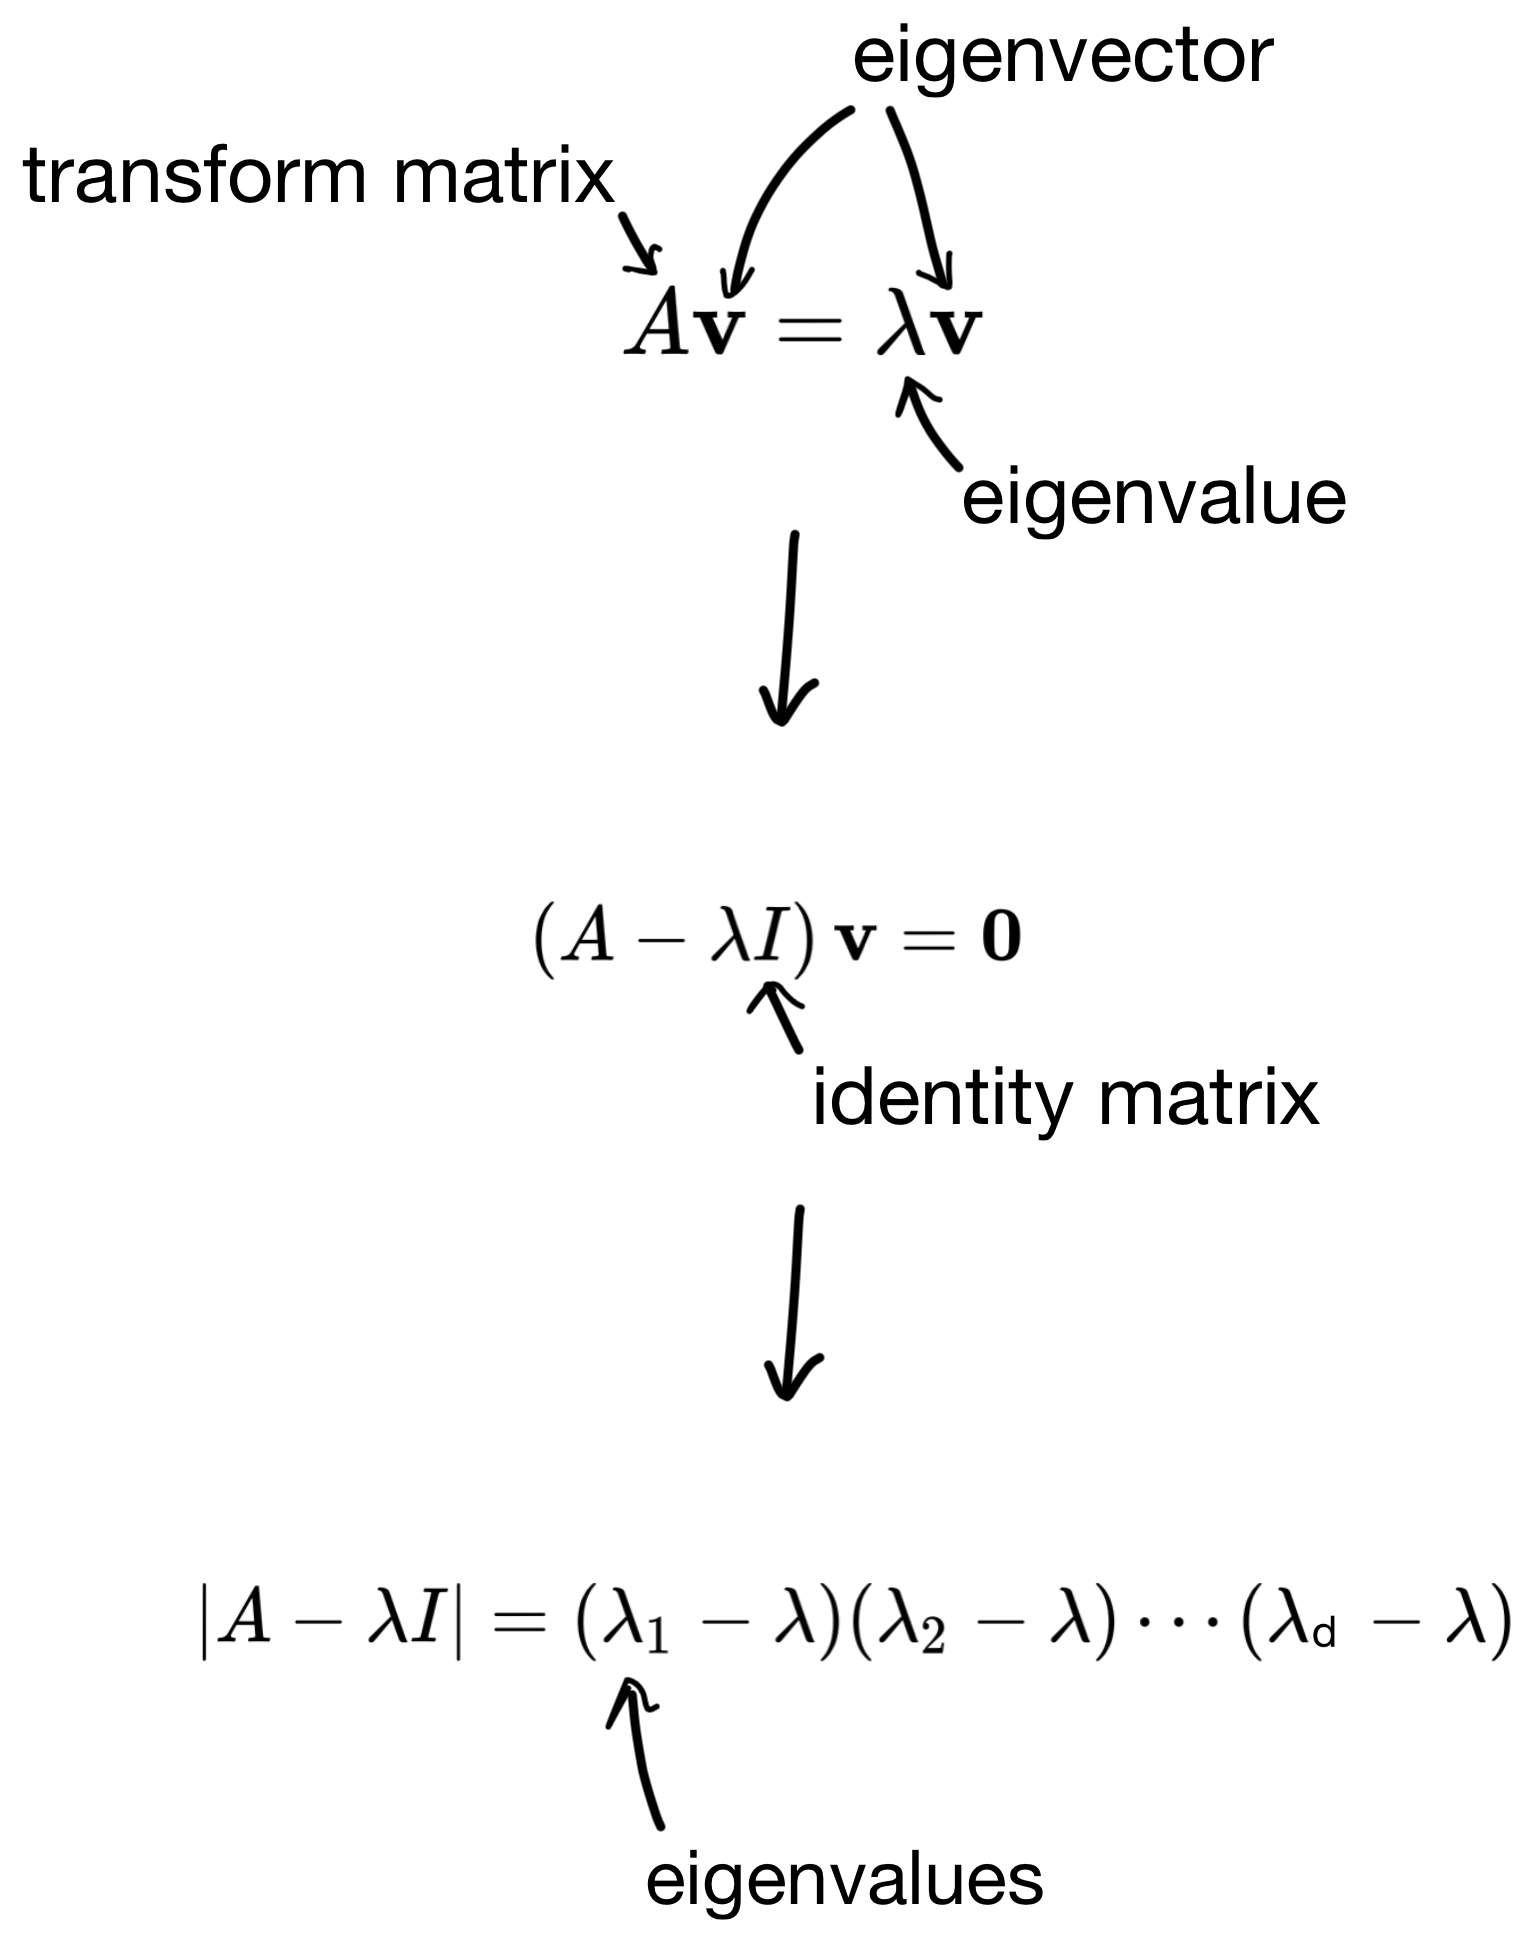 Explained: Principle Component Analysis (PCA)